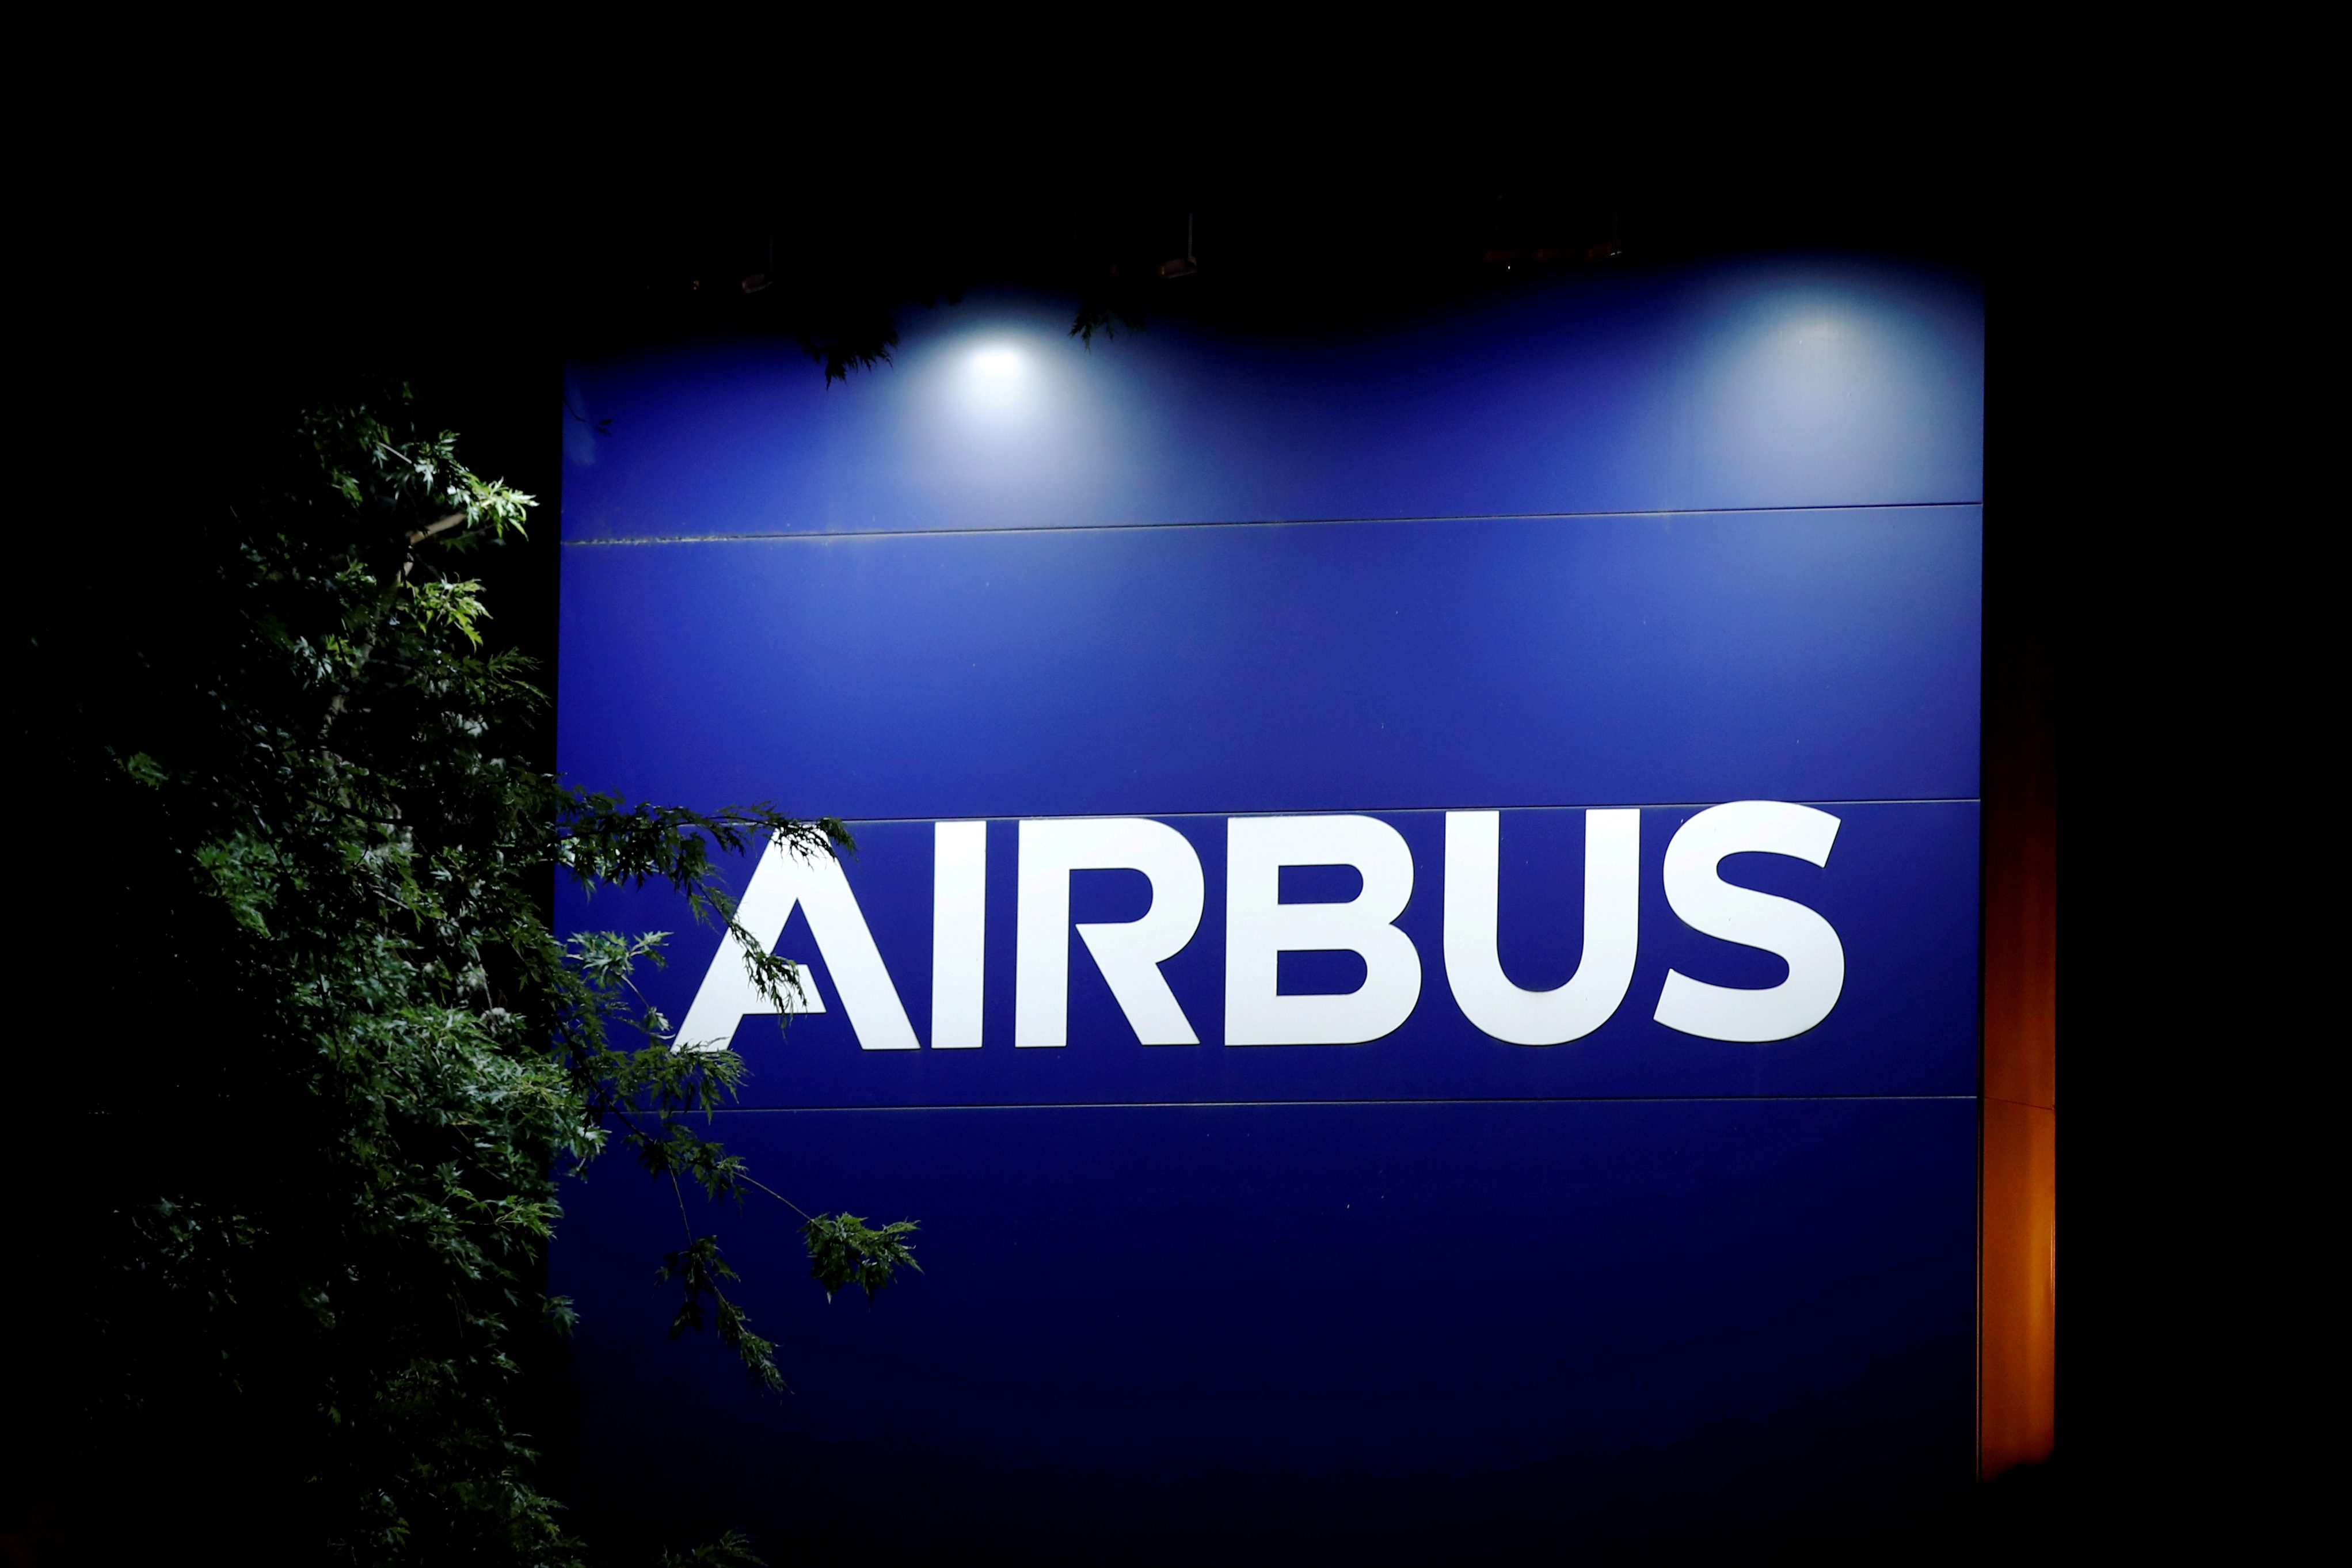 About 500 Airbus staff under quarantine after Hamburg COVID-19 outbreak